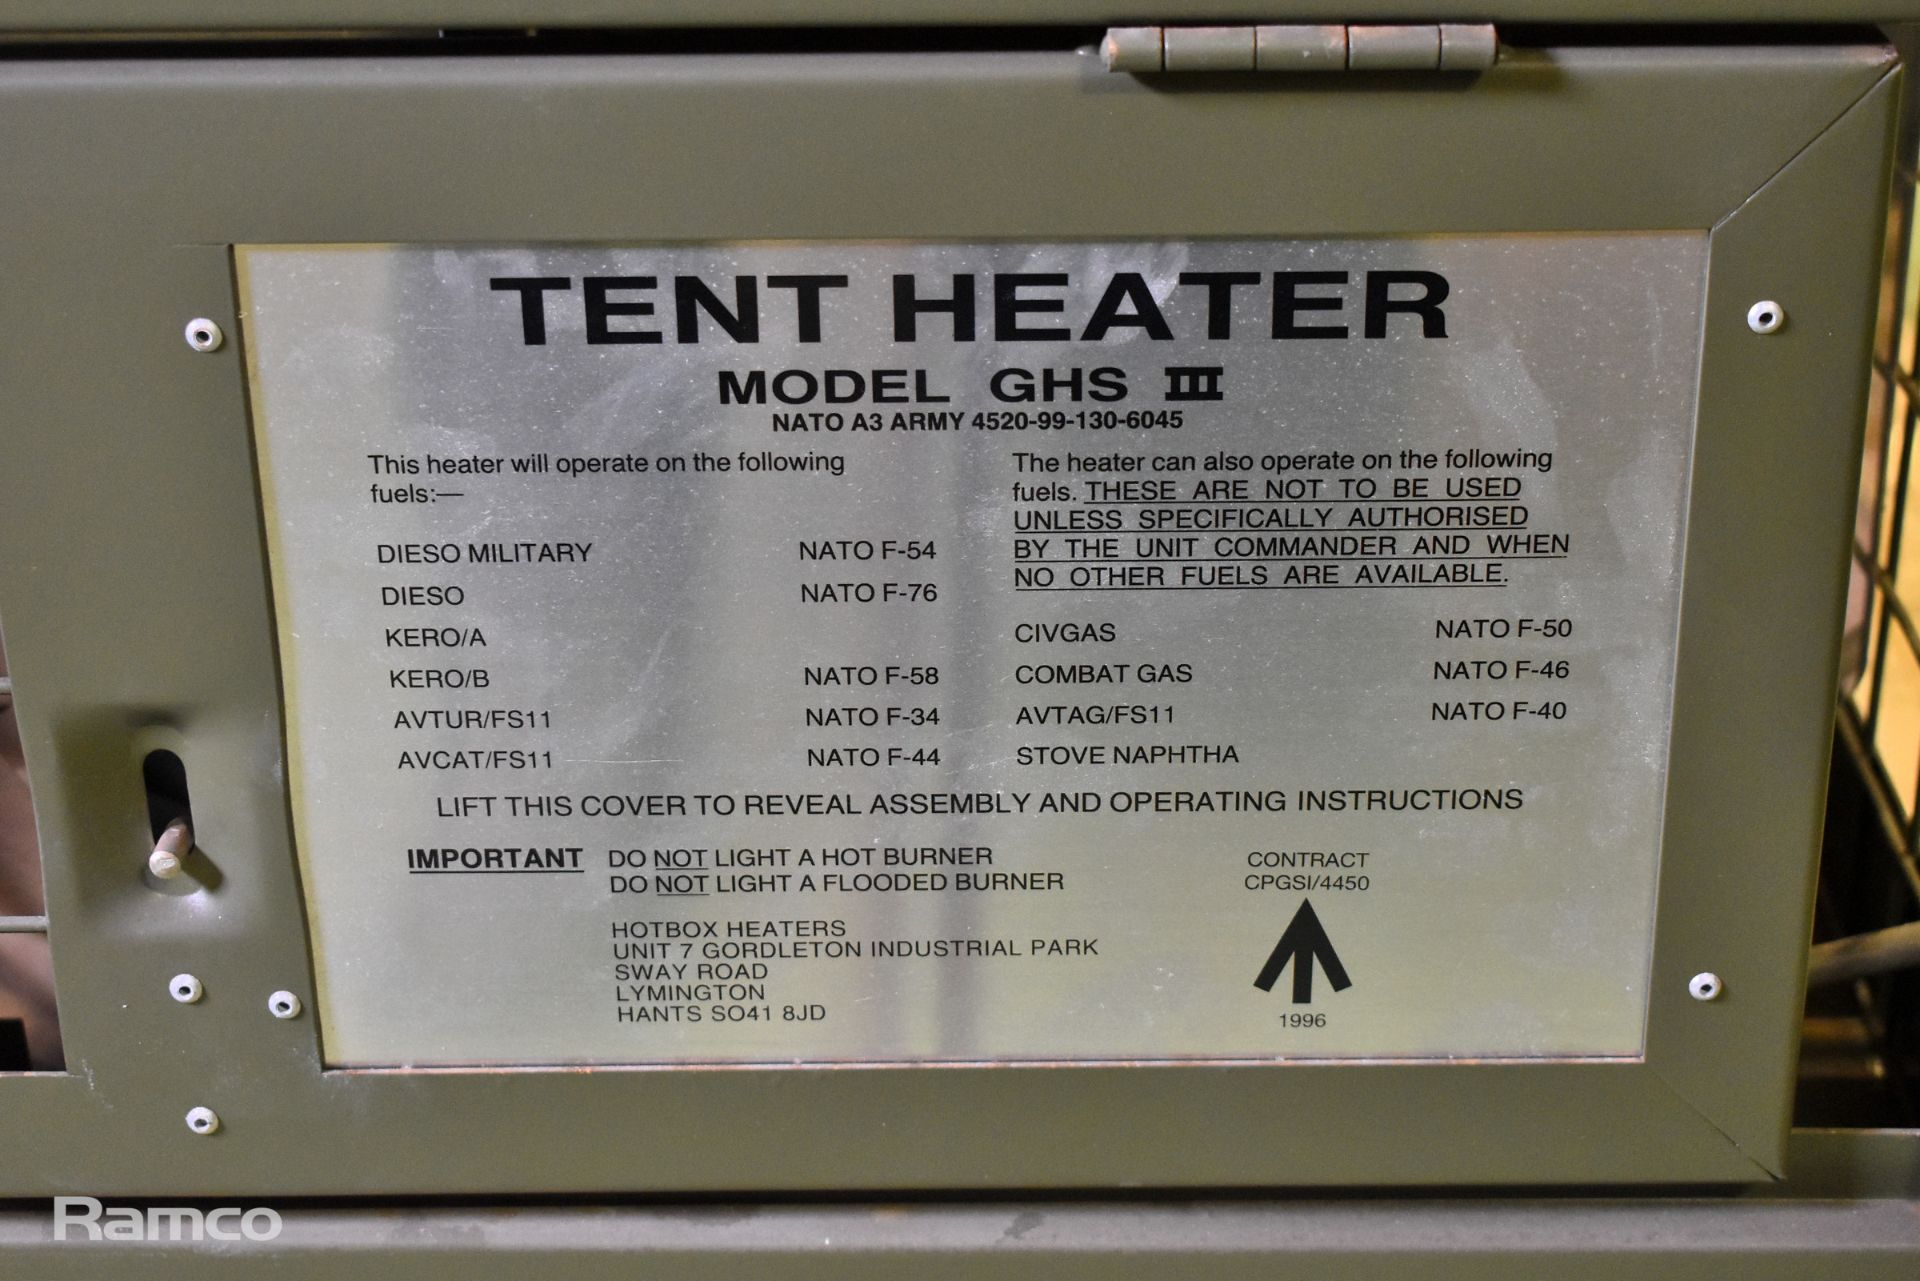 Tent Heater Model GHS 3 - NATO A3 Army NSN 4520-99-130-6045 - Image 3 of 3